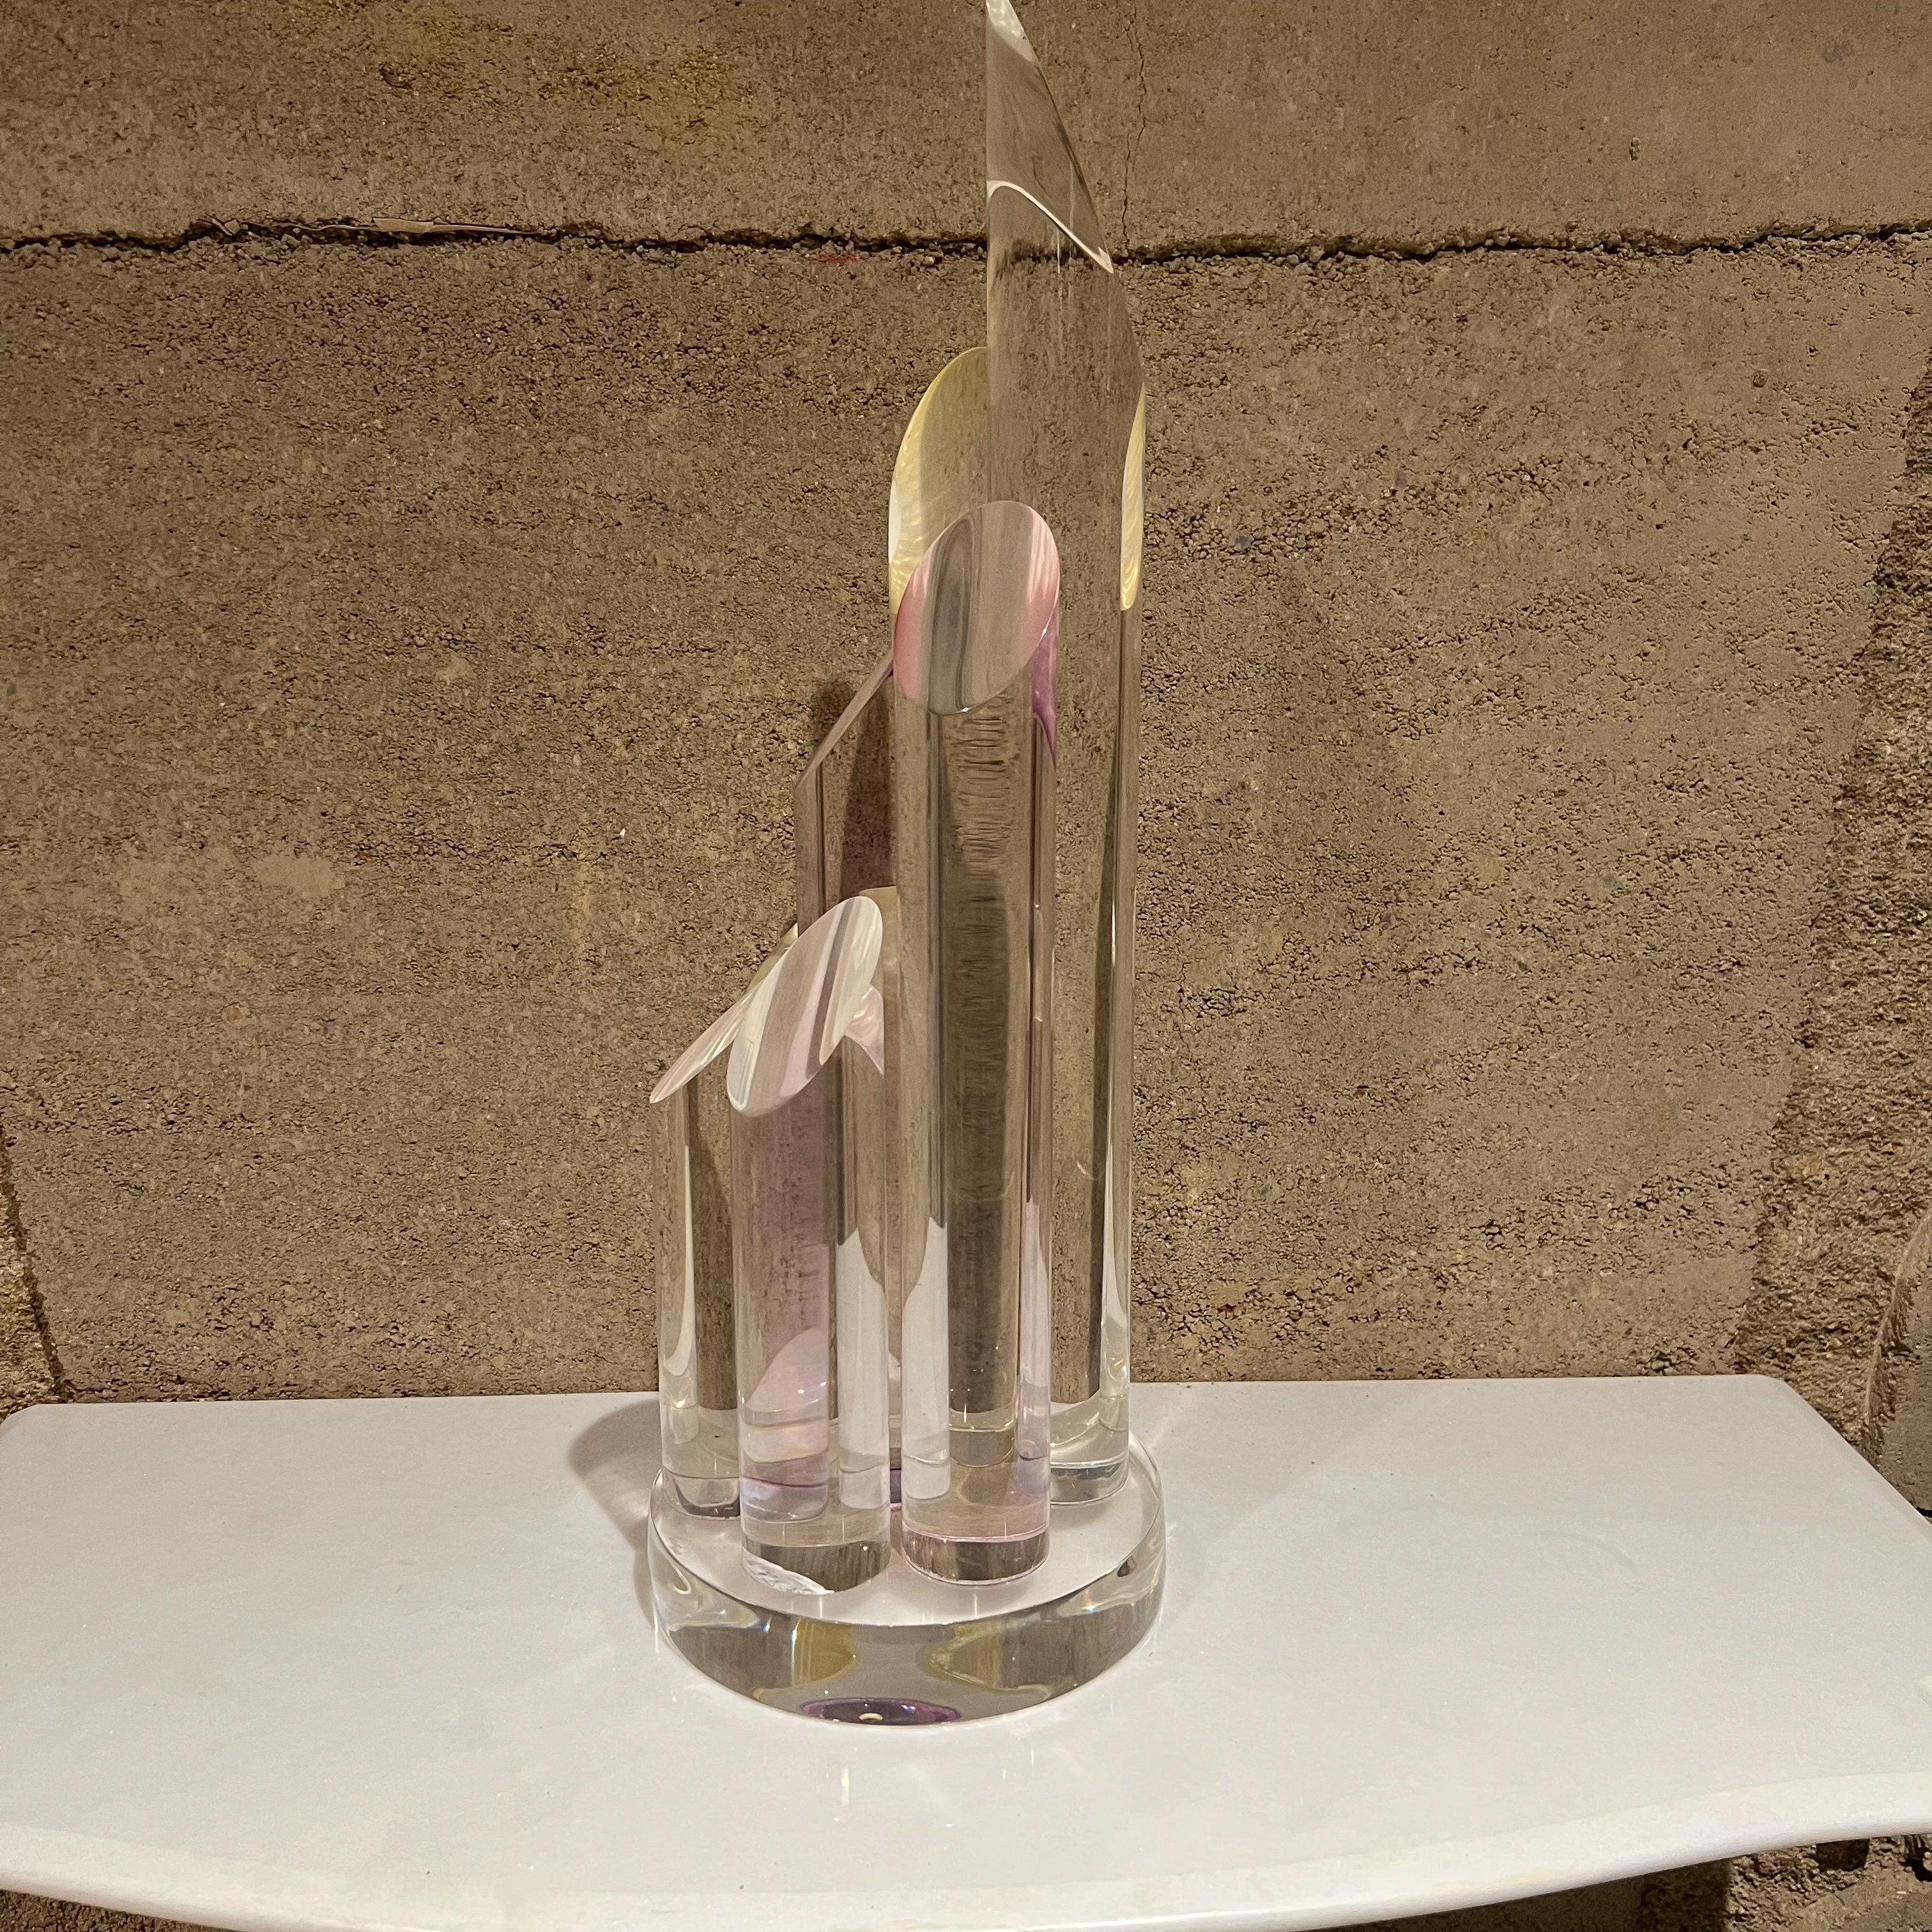 1970s Lucite Pyramid Abstract Modern Sculpture by Artist Hivo Van Teal For Sale 4